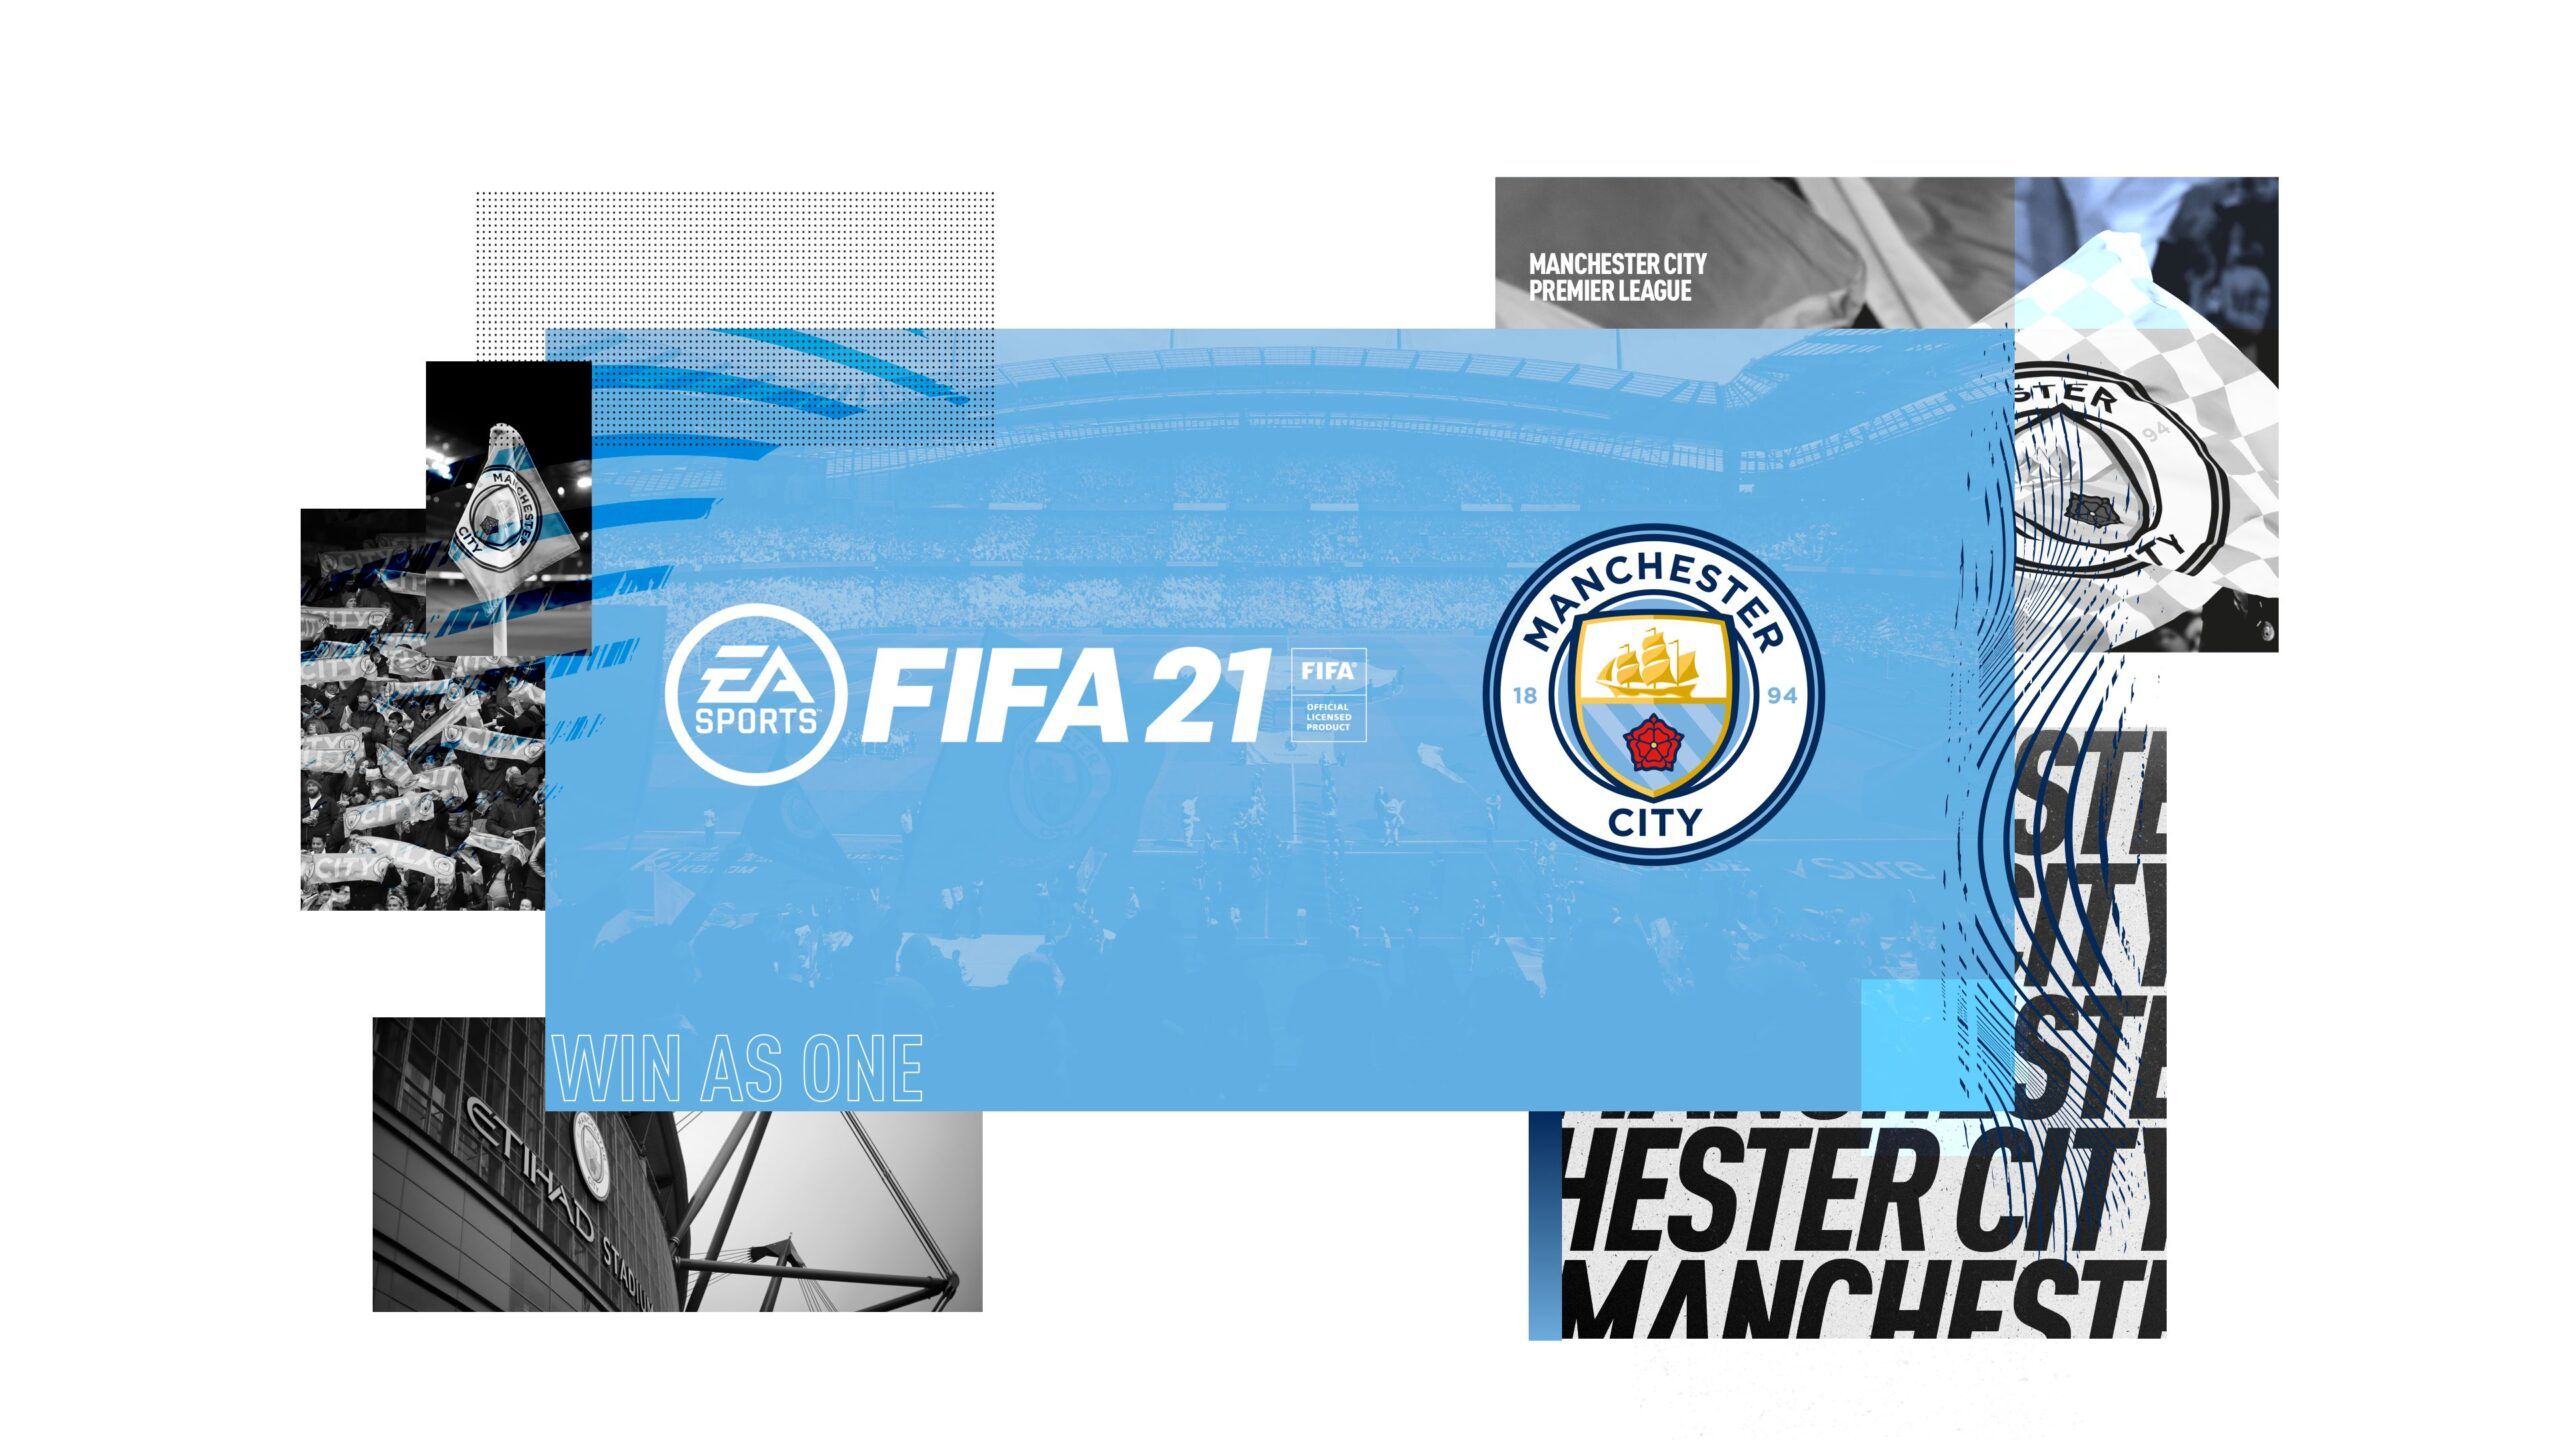 FIFA 21: Covers and Wallpaper for Premier League teams available. FifaUltimateTeam.it